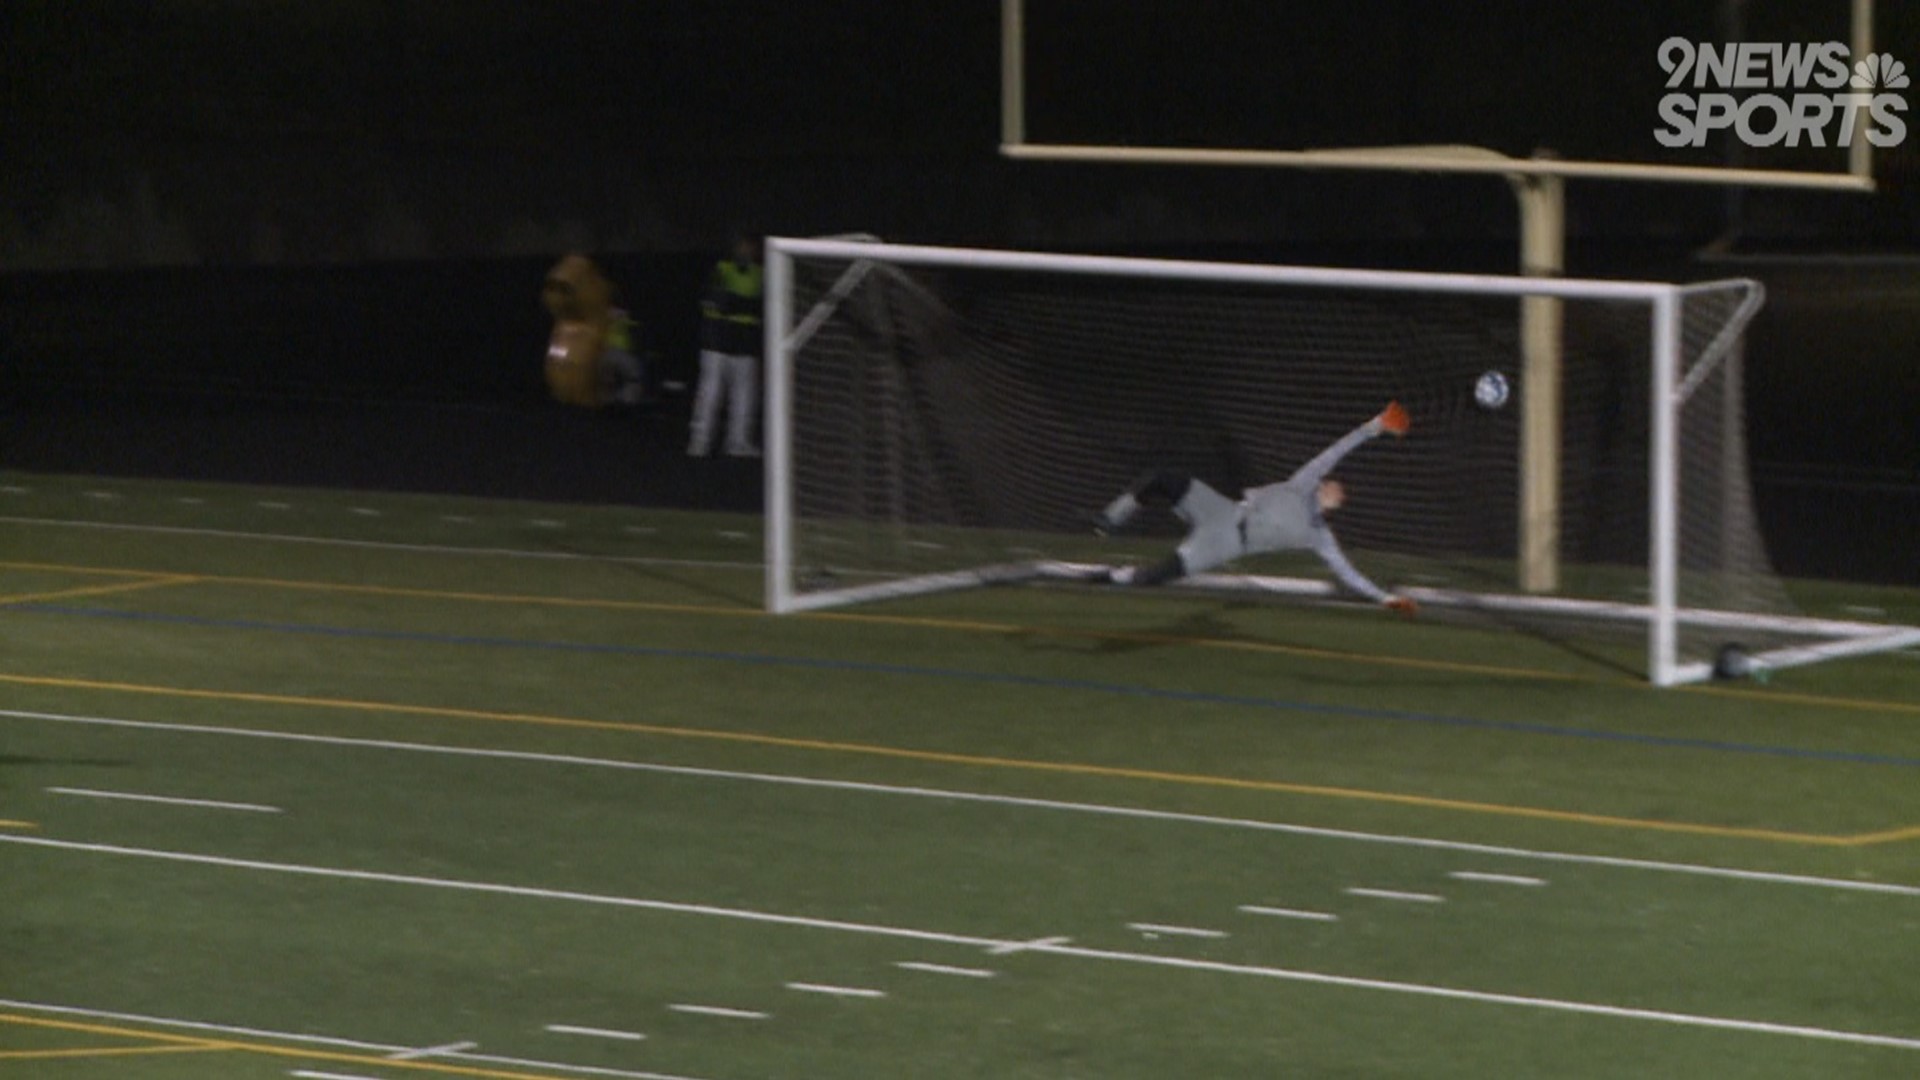 The SaberCats outlasted the Panthers 3-2 in double overtime on Tuesday night to advance.